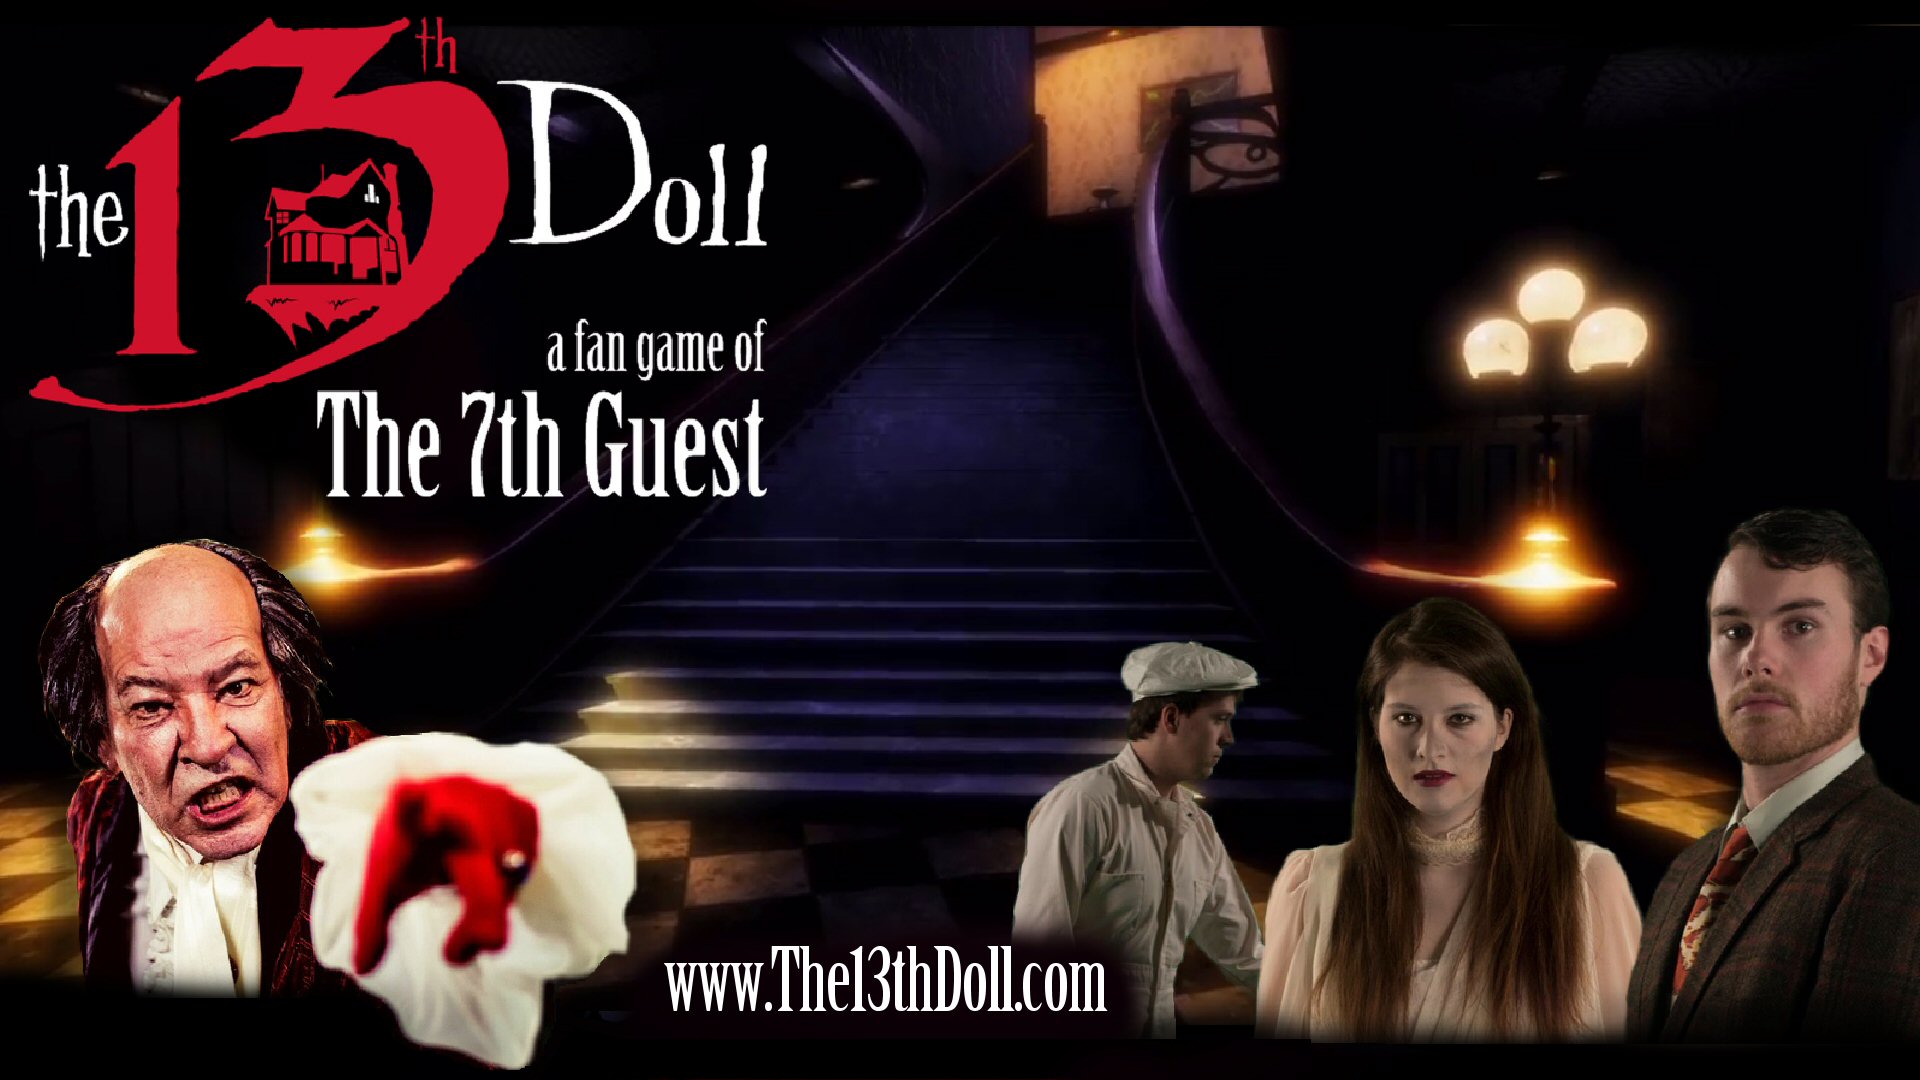 Følg os beton Hæderlig The 13th Doll: A Fan Game of The 7th Guest